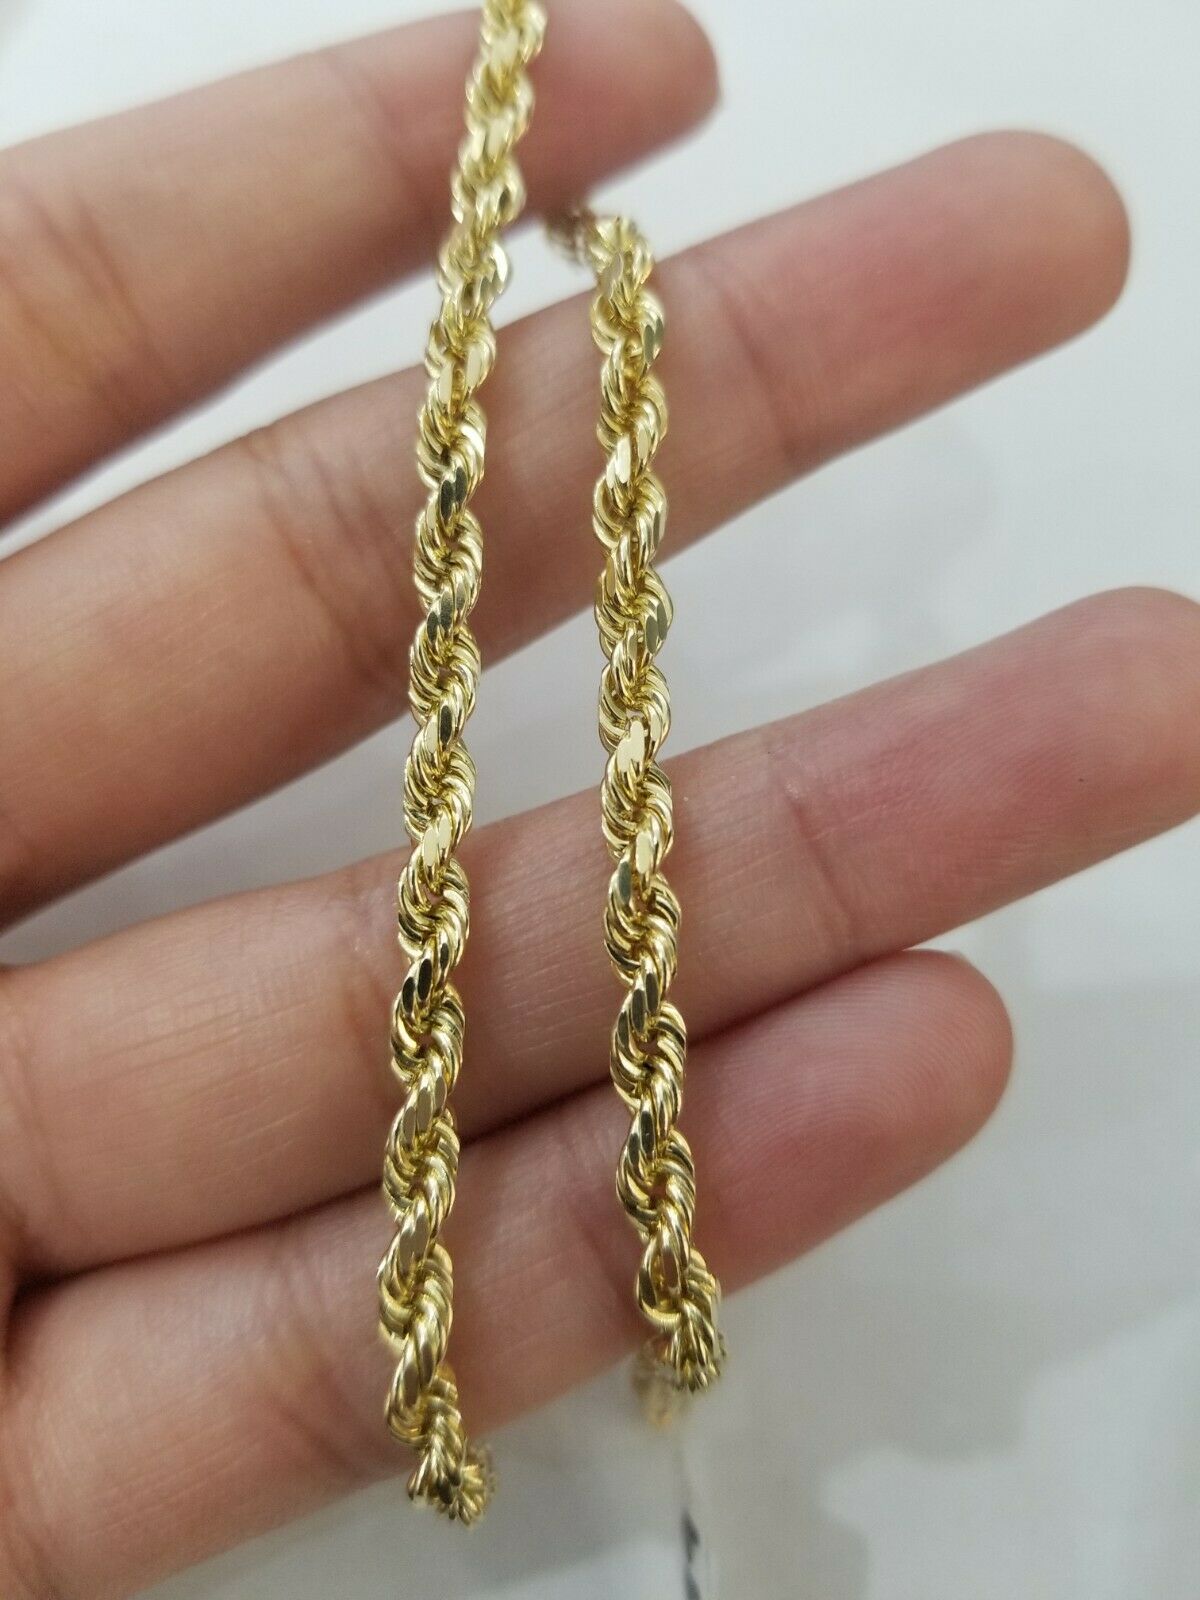 SOLID REAL Gold Rope Bracelet 8" 4mm 10kt Yellow Gold Men's Ladies Diamond Cut